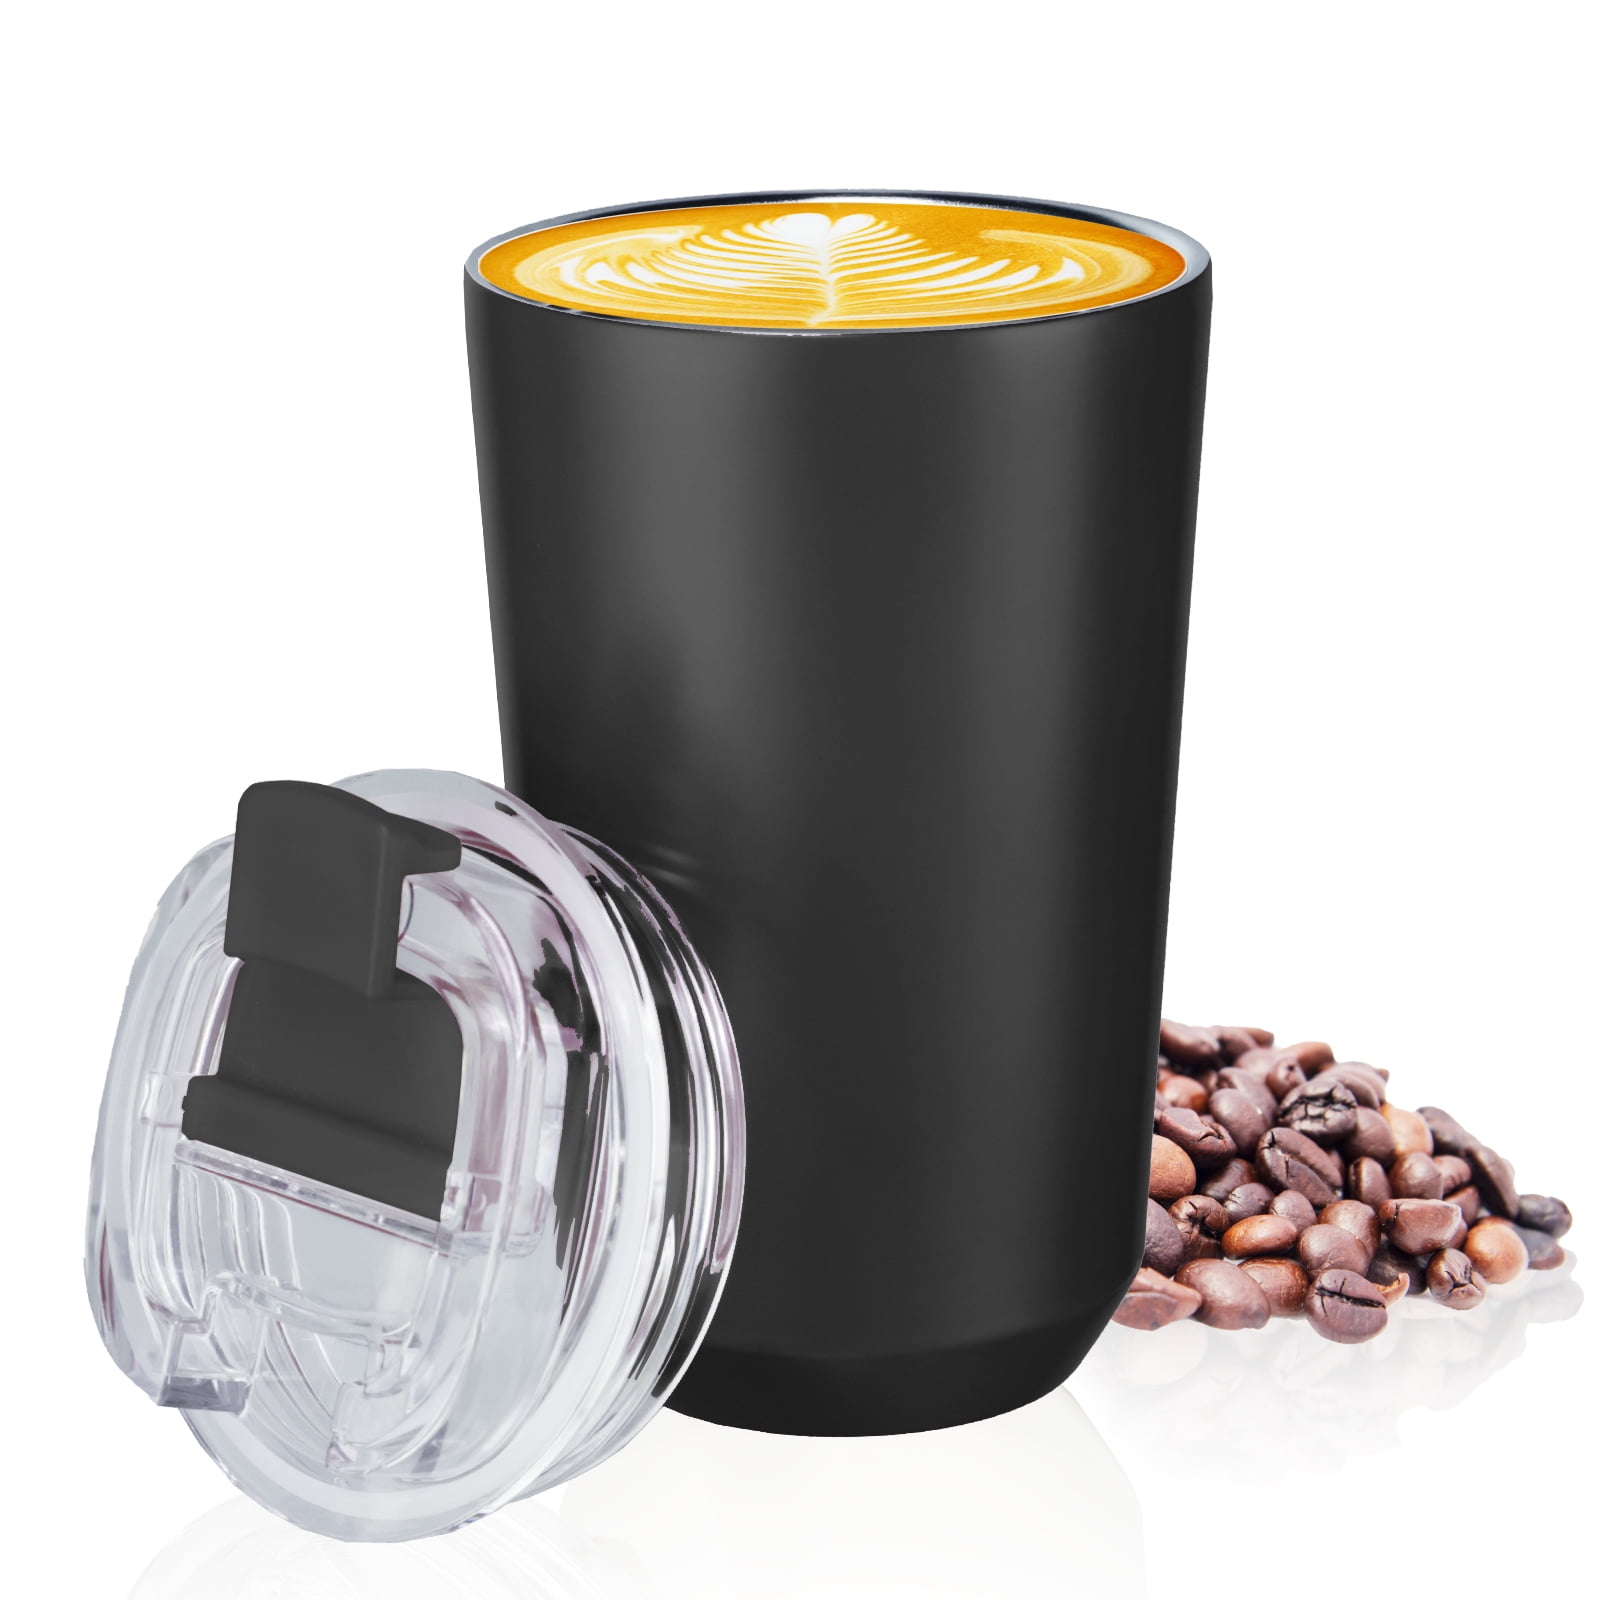 14 oz Insulated Stainless Steel Coffee Mug Spillproof with Lid Double Wall  Travel Coffee Mug with Ha…See more 14 oz Insulated Stainless Steel Coffee